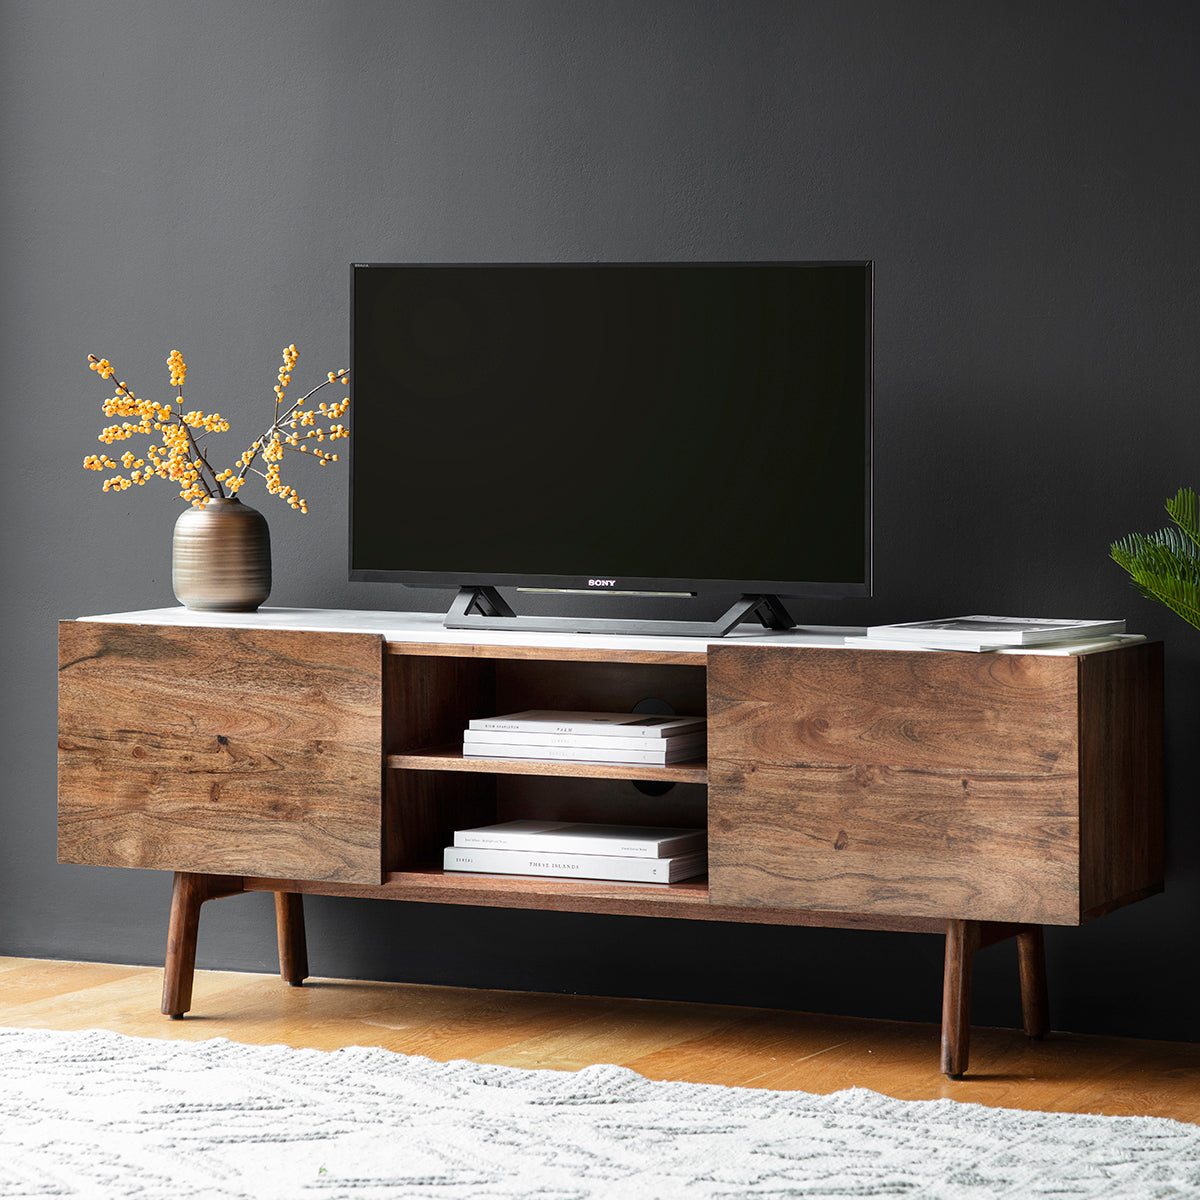 Wooden TV unit with white marble top and storage in a room setting with TV and decor 